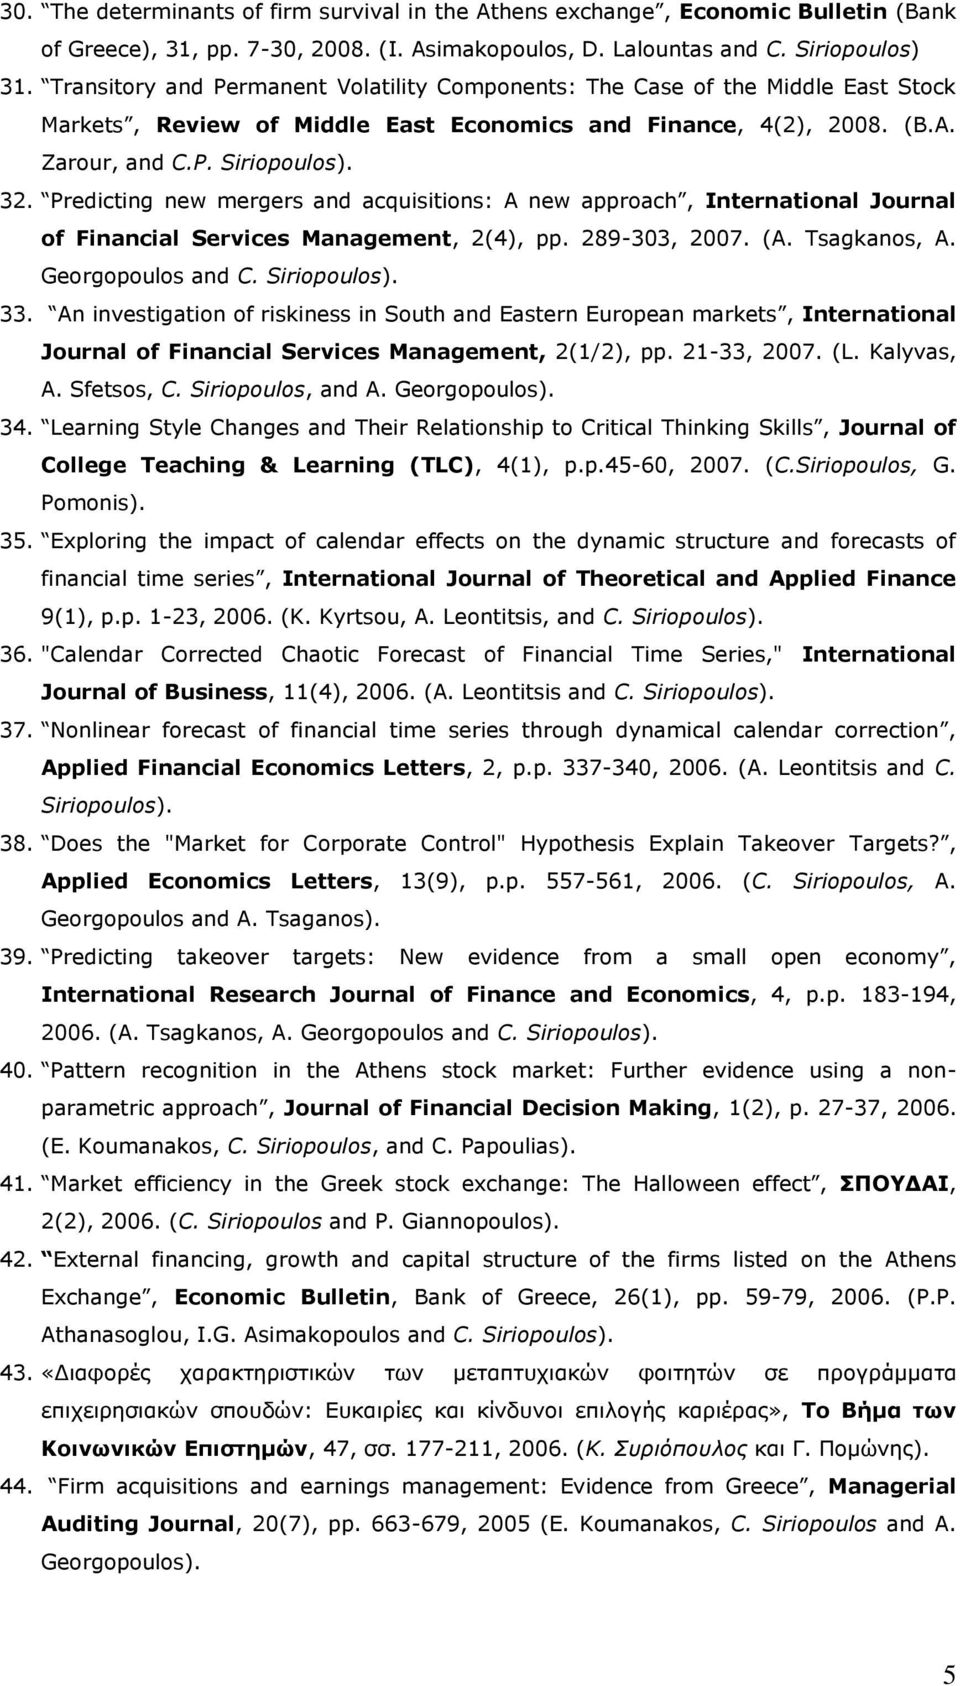 Predicting new mergers and acquisitions: A new approach, International Journal of Financial Services Management, 2(4), pp. 289-303, 2007. (A. Tsagkanos, A. Georgopoulos and C. Siriopoulos). 33.